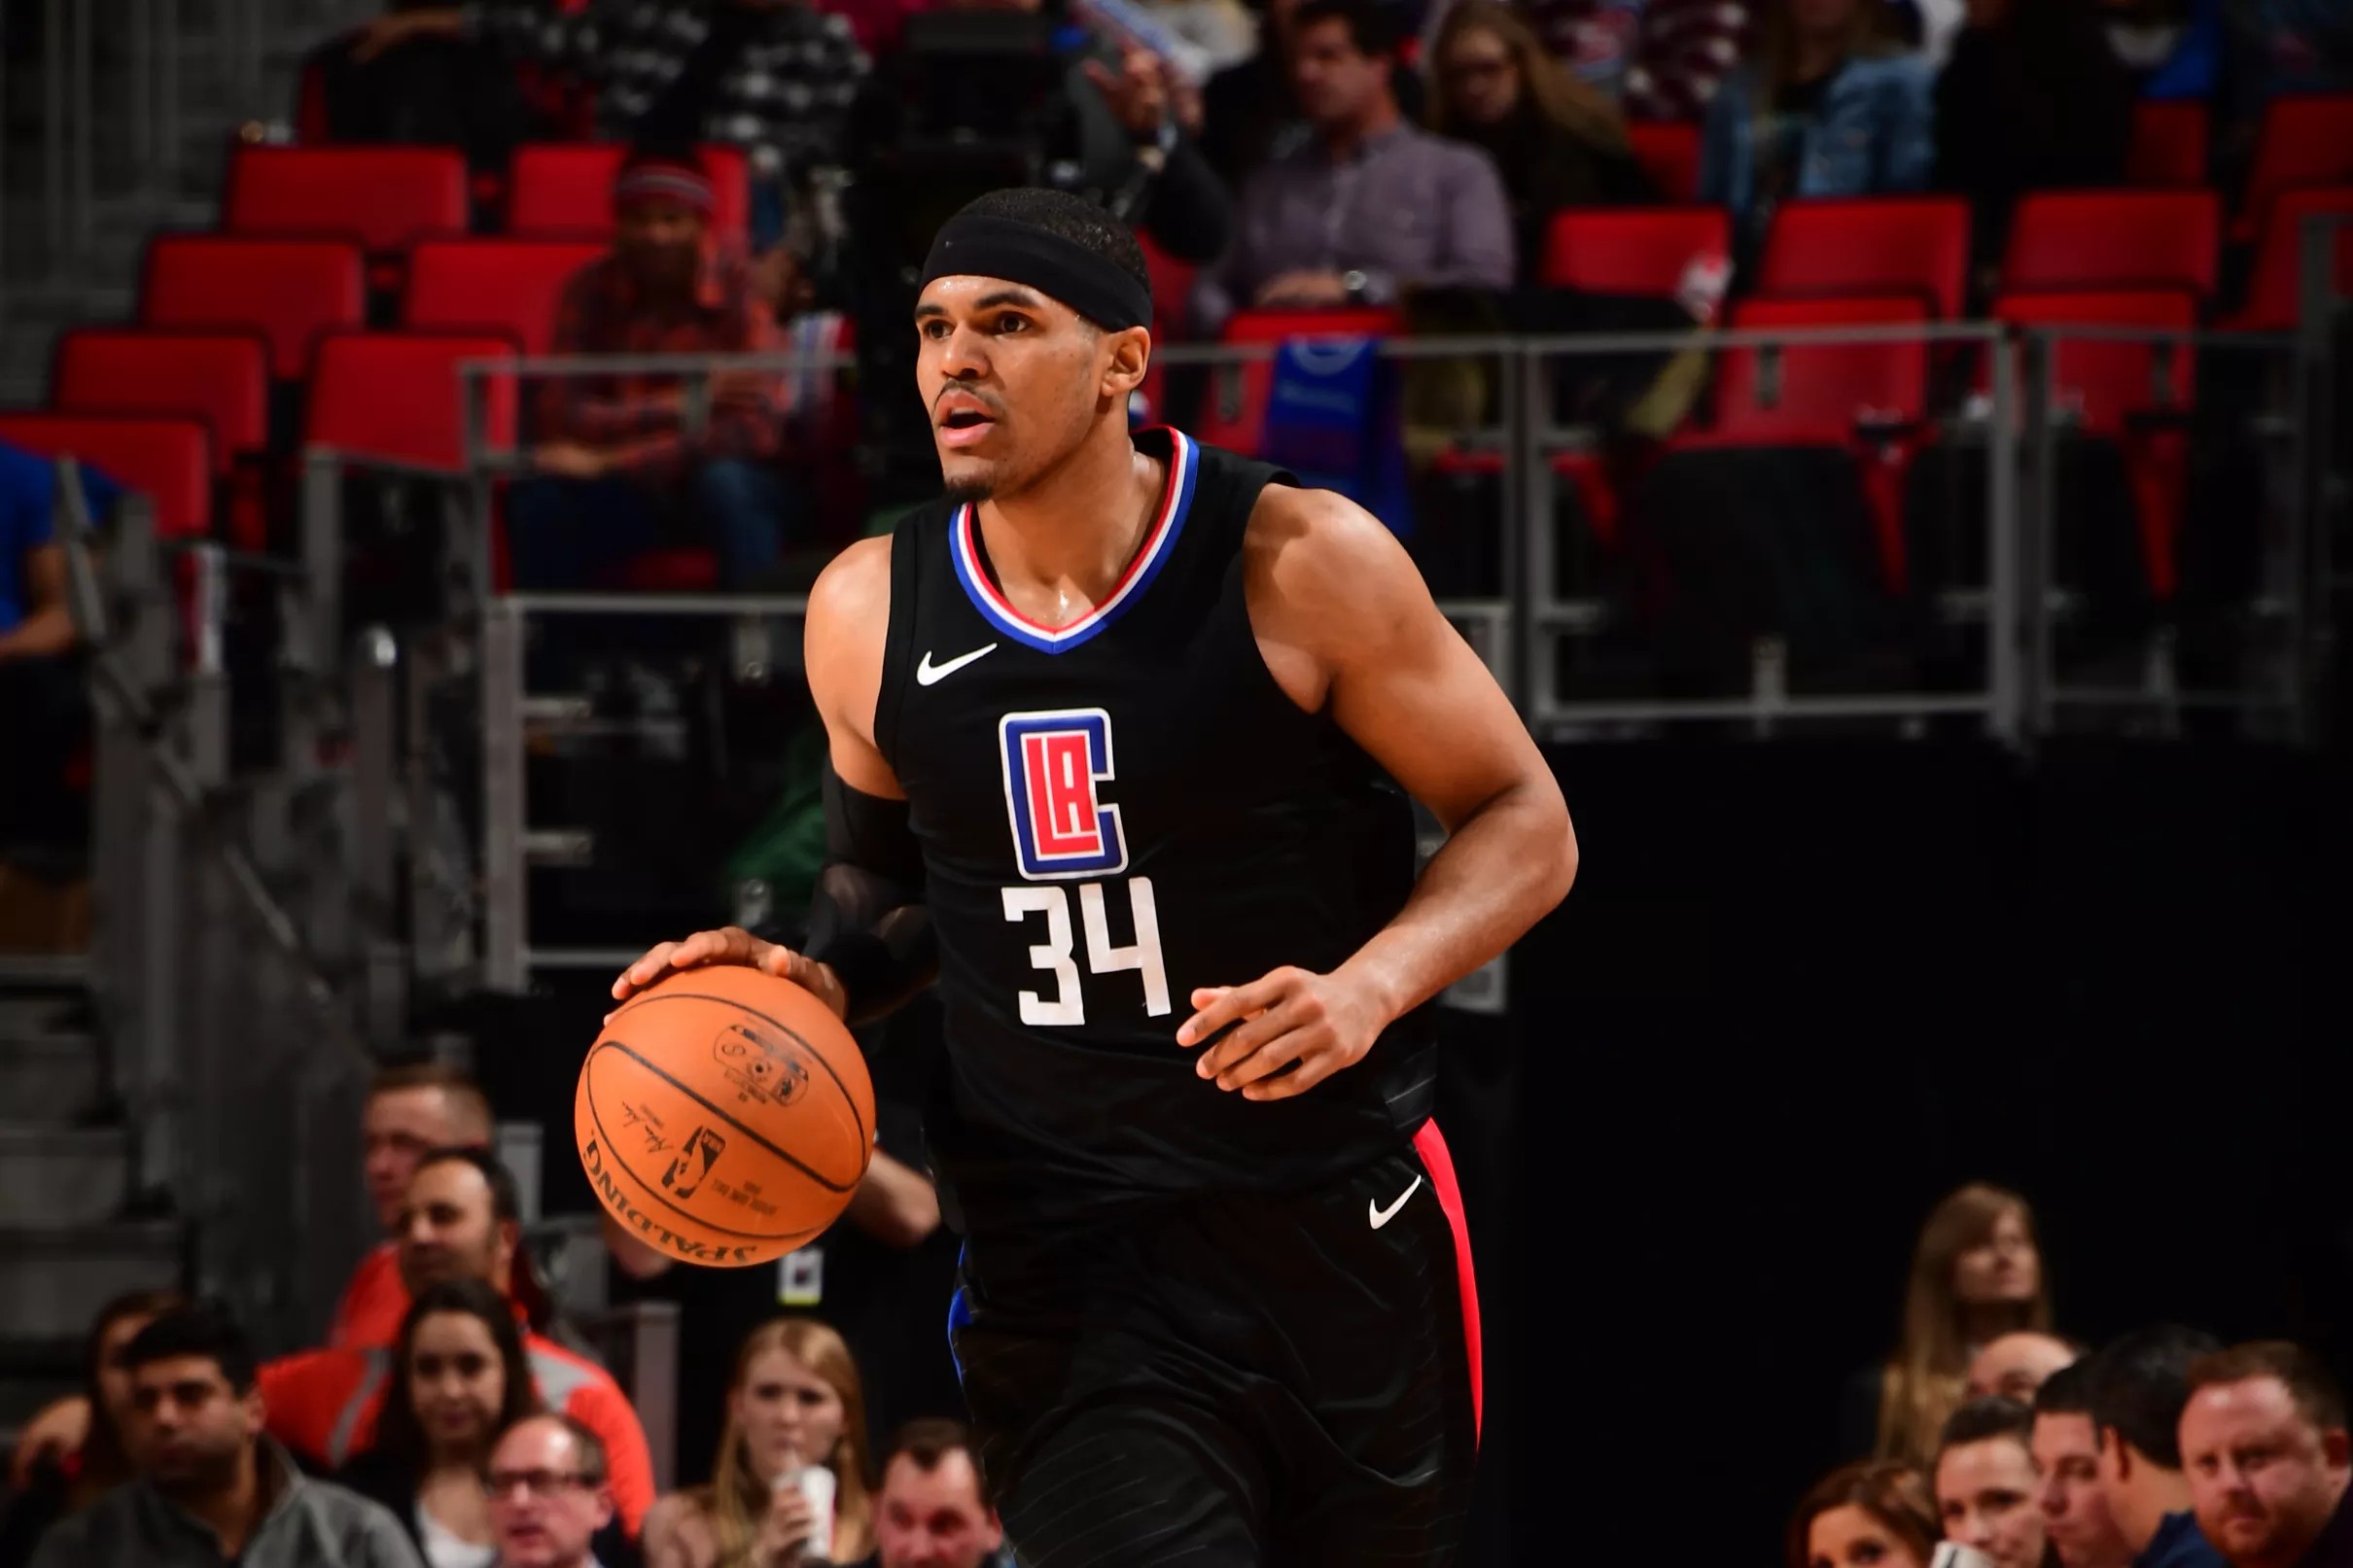 Game Preview: Still Eyeing Playoffs, Clippers Face Nets in Brooklyn